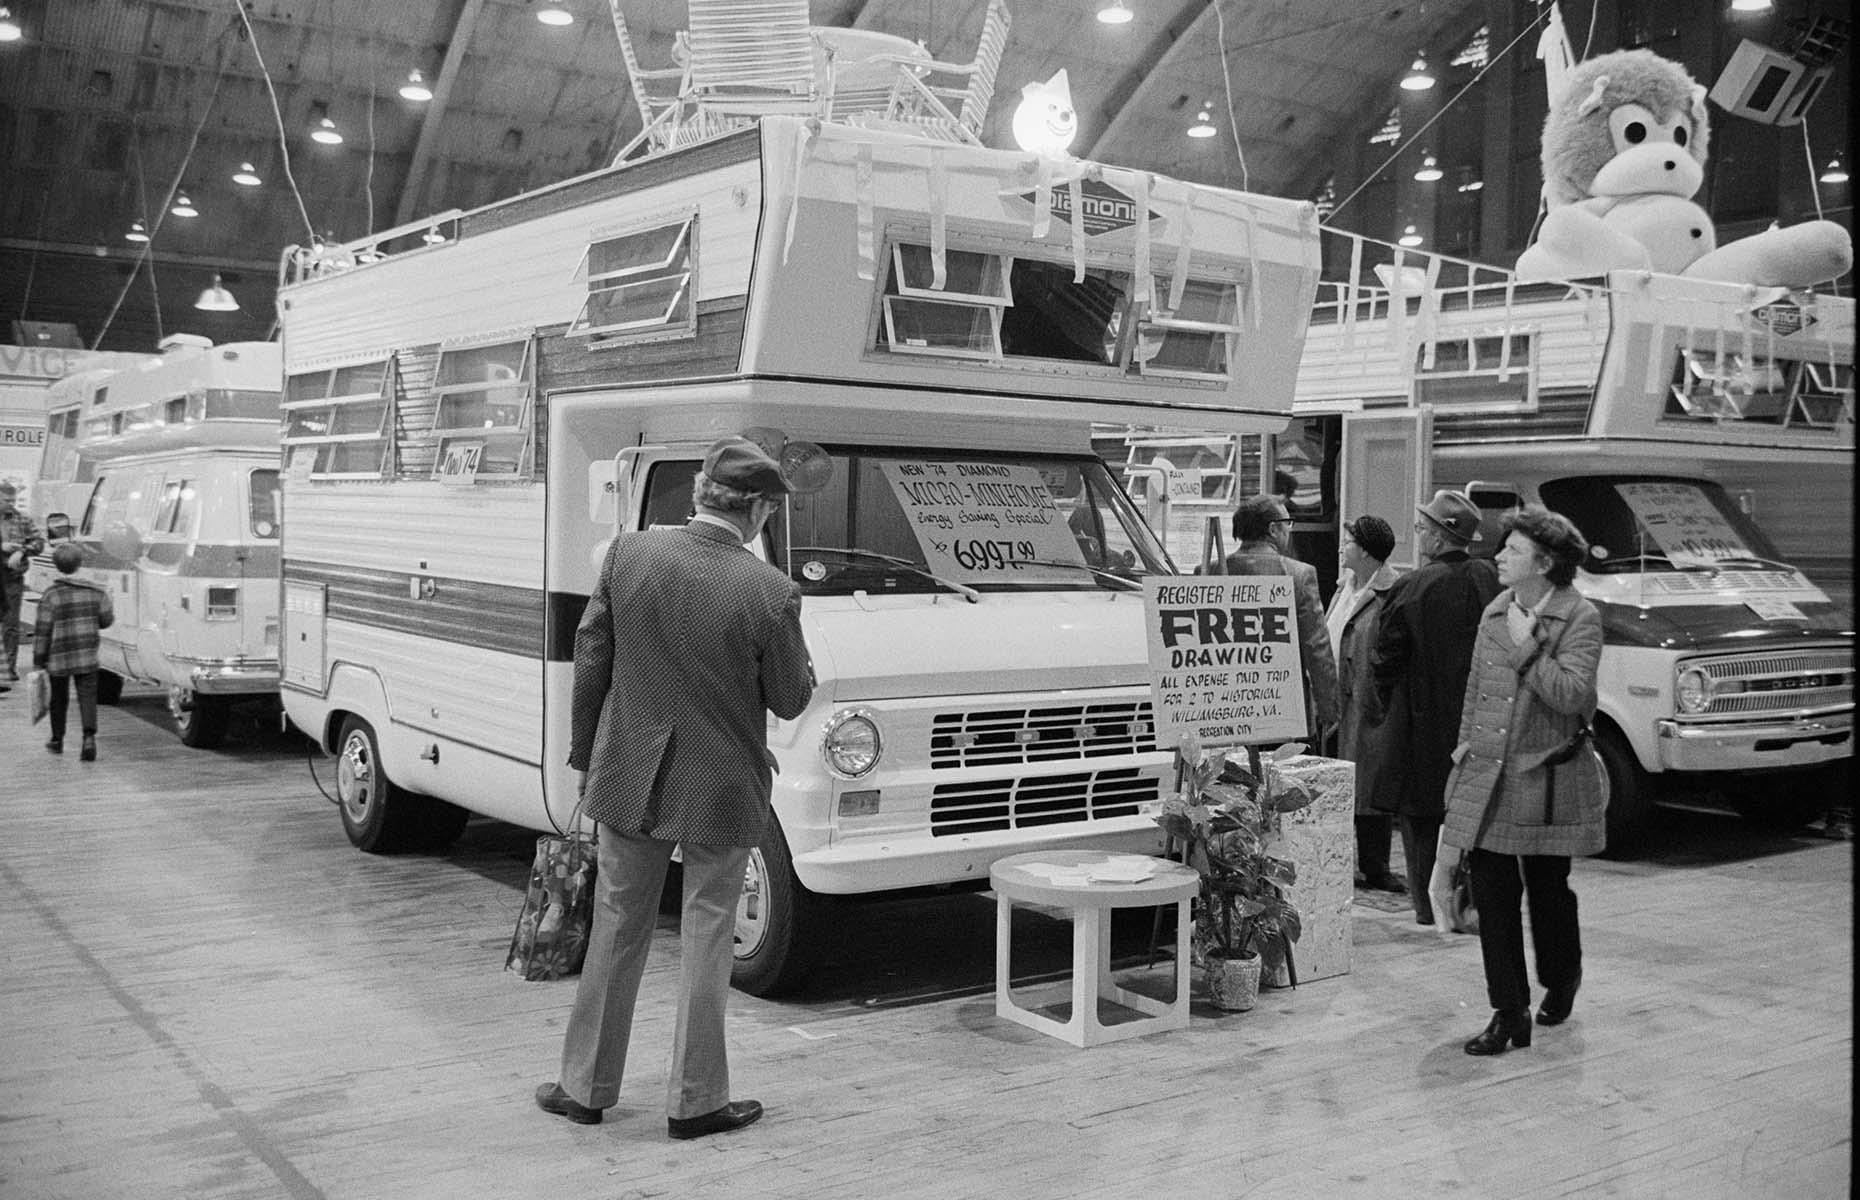 By the mid-1970s, RVs were part of the American psyche. This motorhome showroom from the decade doesn't look so different from those of the modern day. Potential buyers wander around the mammoth vehicles which come complete with roof decks and are described as 'micro mini-homes'.